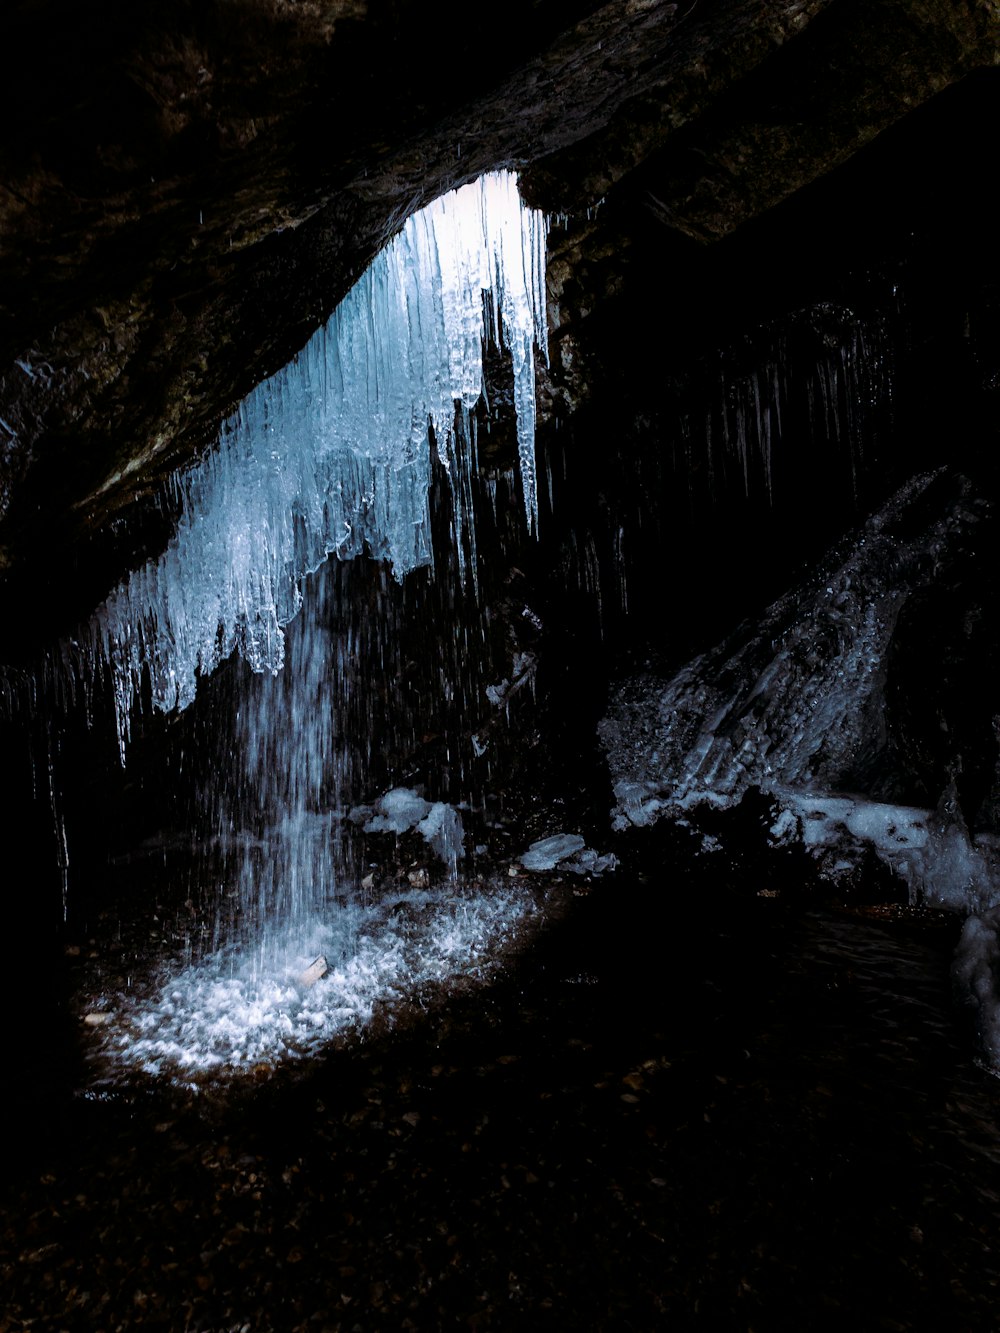 water falls in cave during daytime